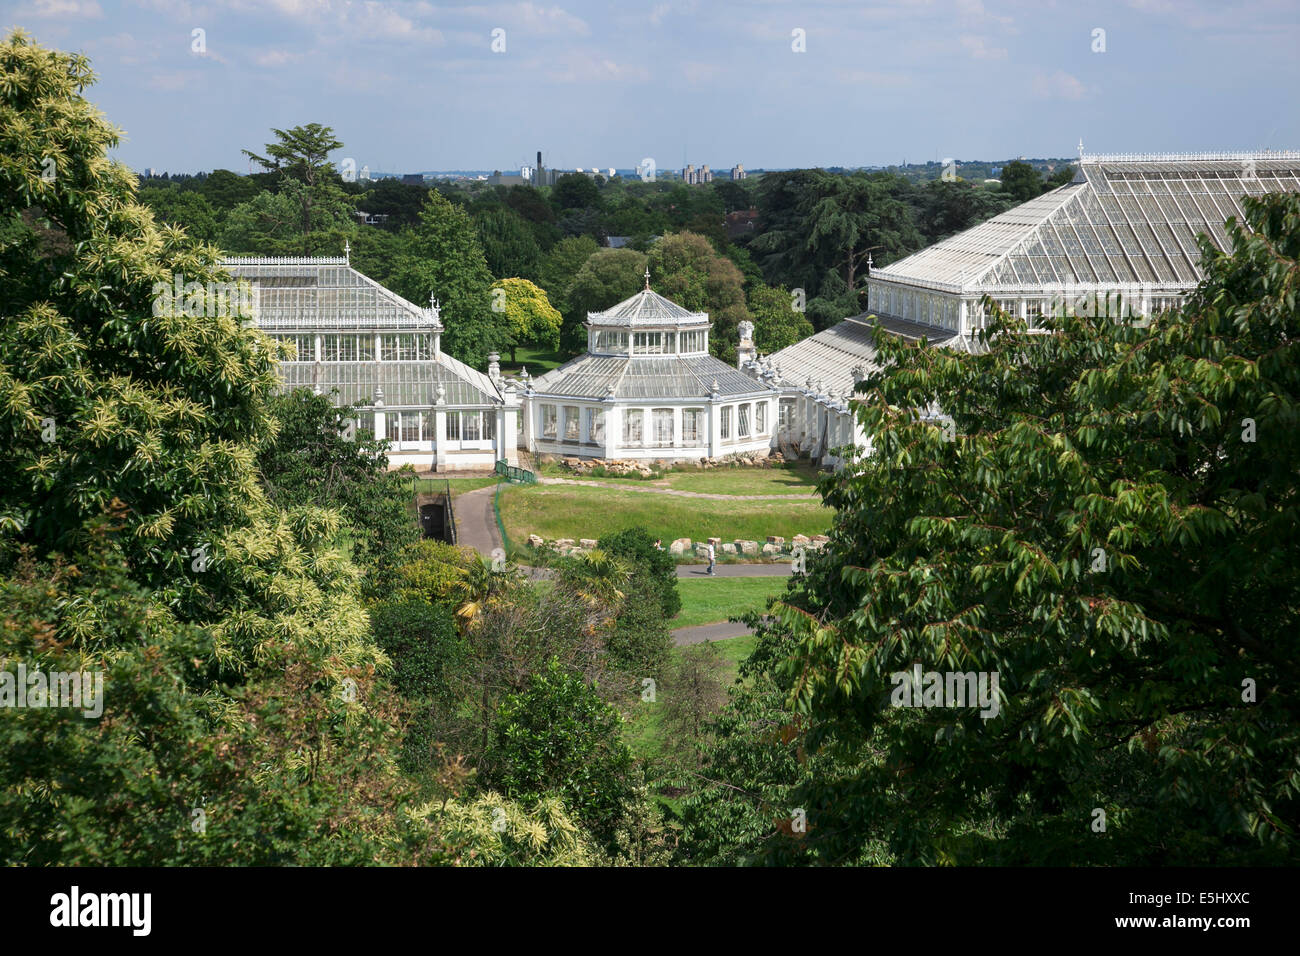 View of Temperate House from the Xstrata Treetop Walkway - Kew Gardens, London Stock Photo